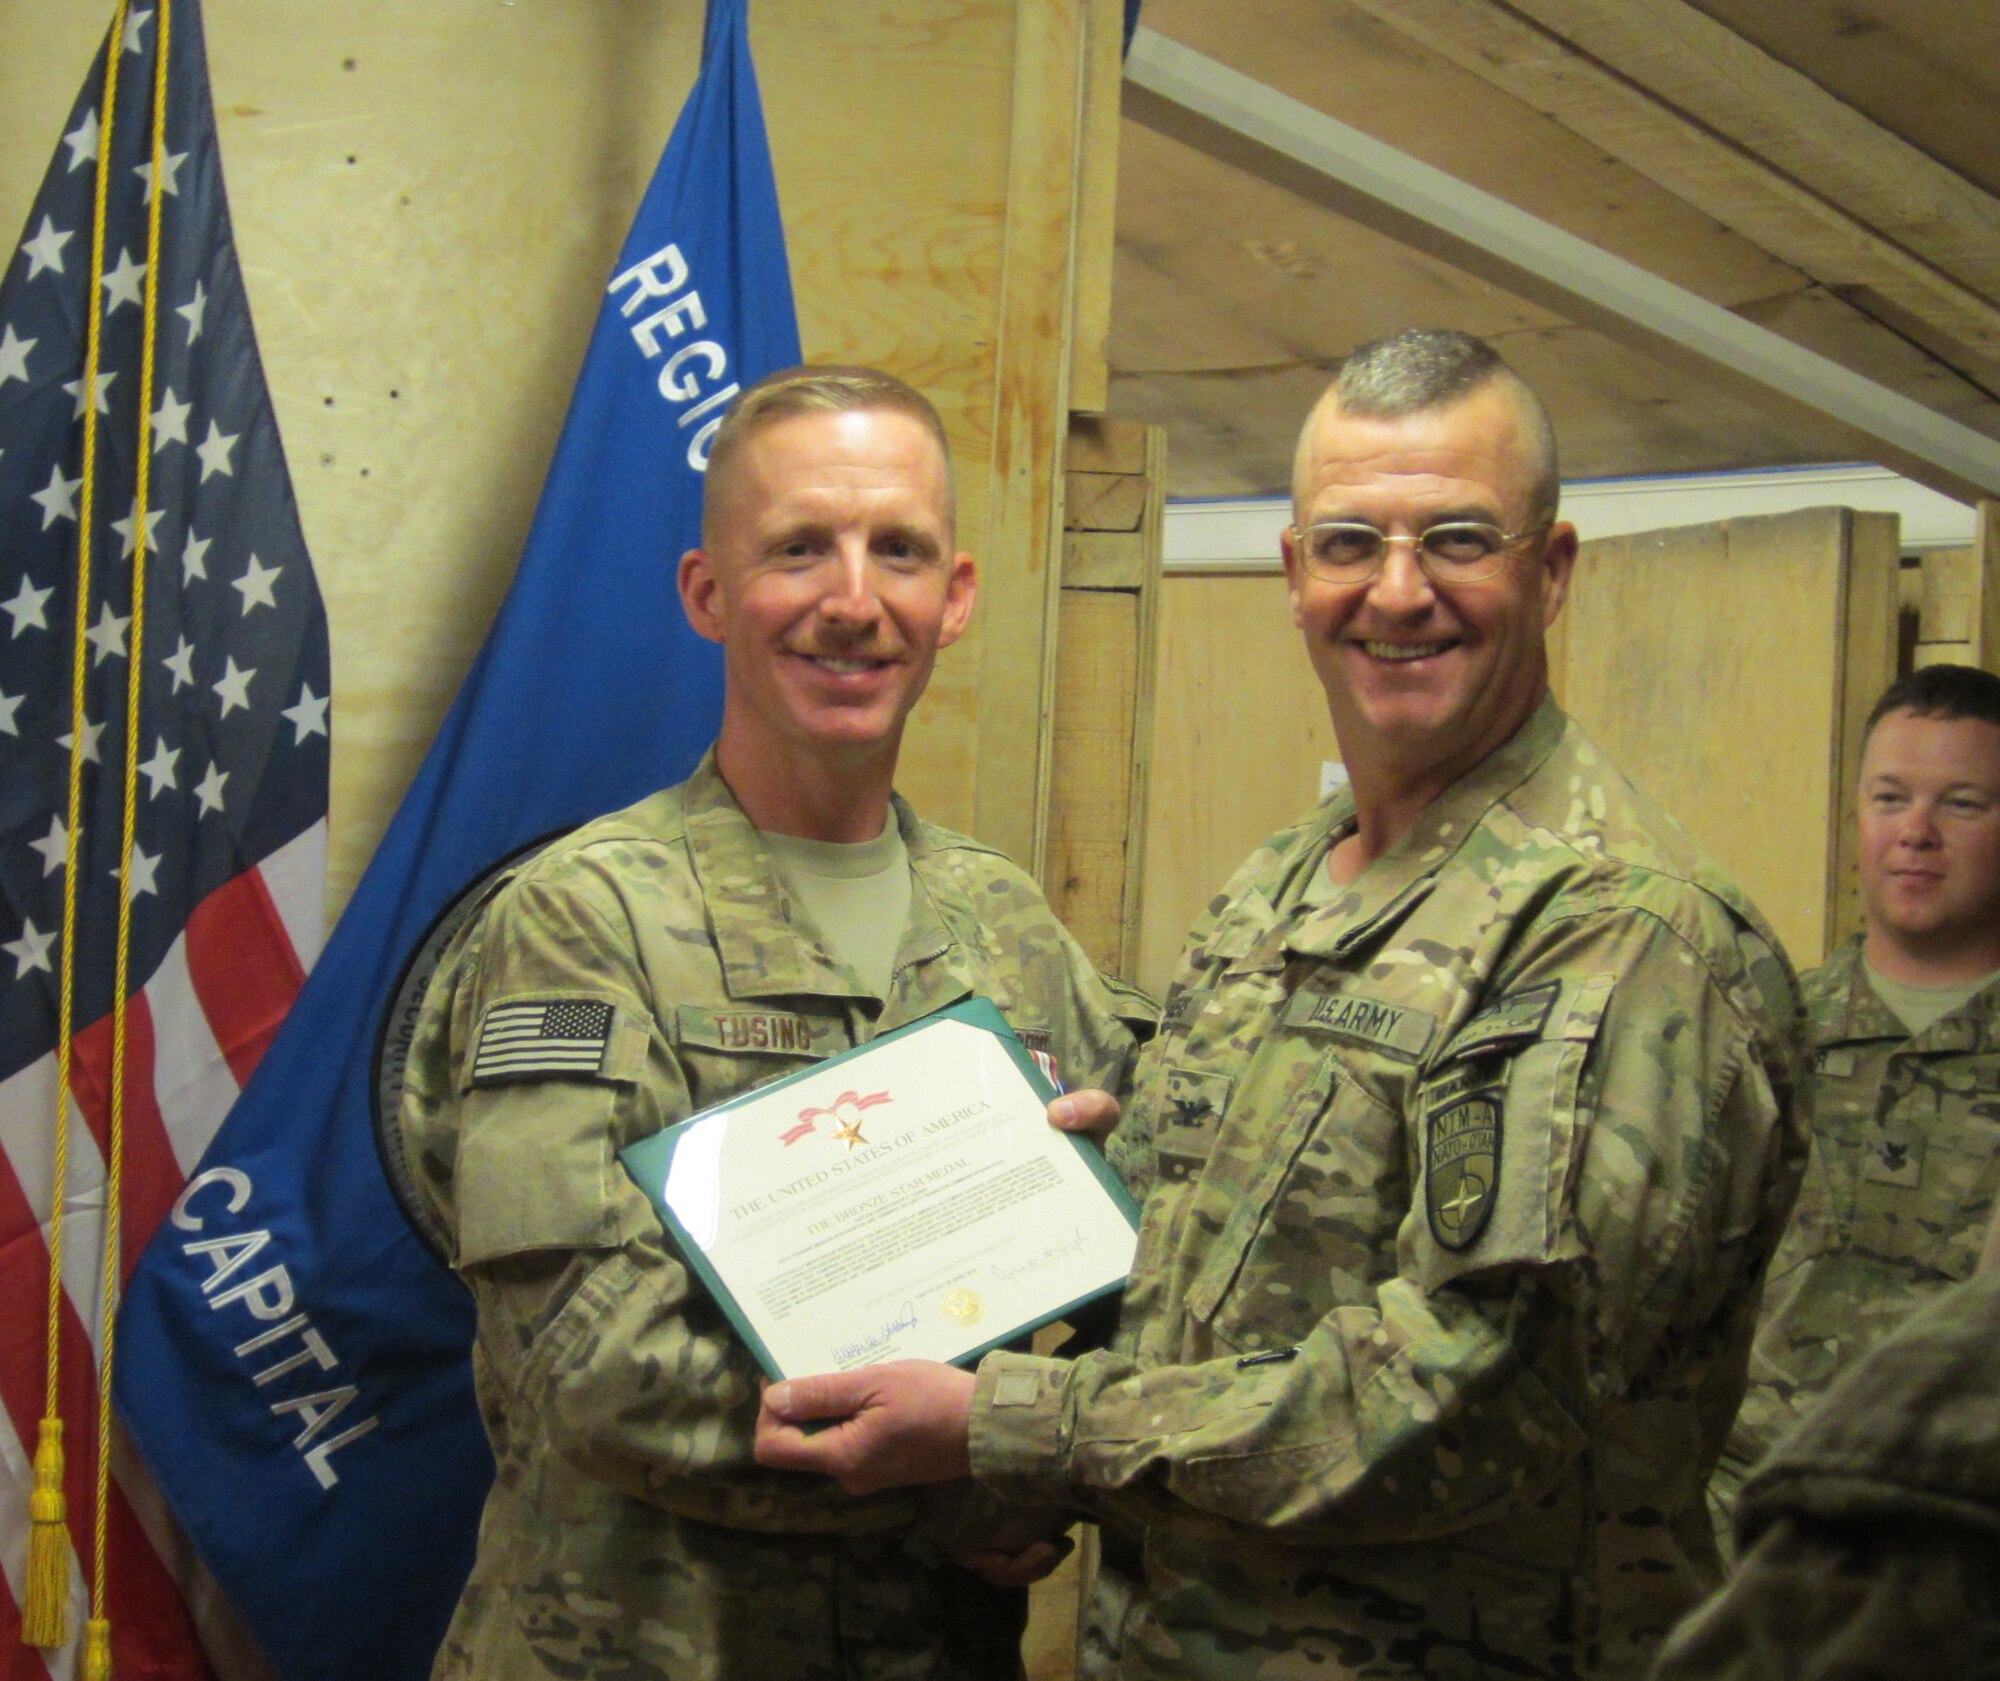 RSC-Capital Commander,  Col. Arthur G. Weeks, III, presented  Capt. Christopher T. Tusing with the Bronze Star Medal during his deployment to Afghanistan in 2012.
